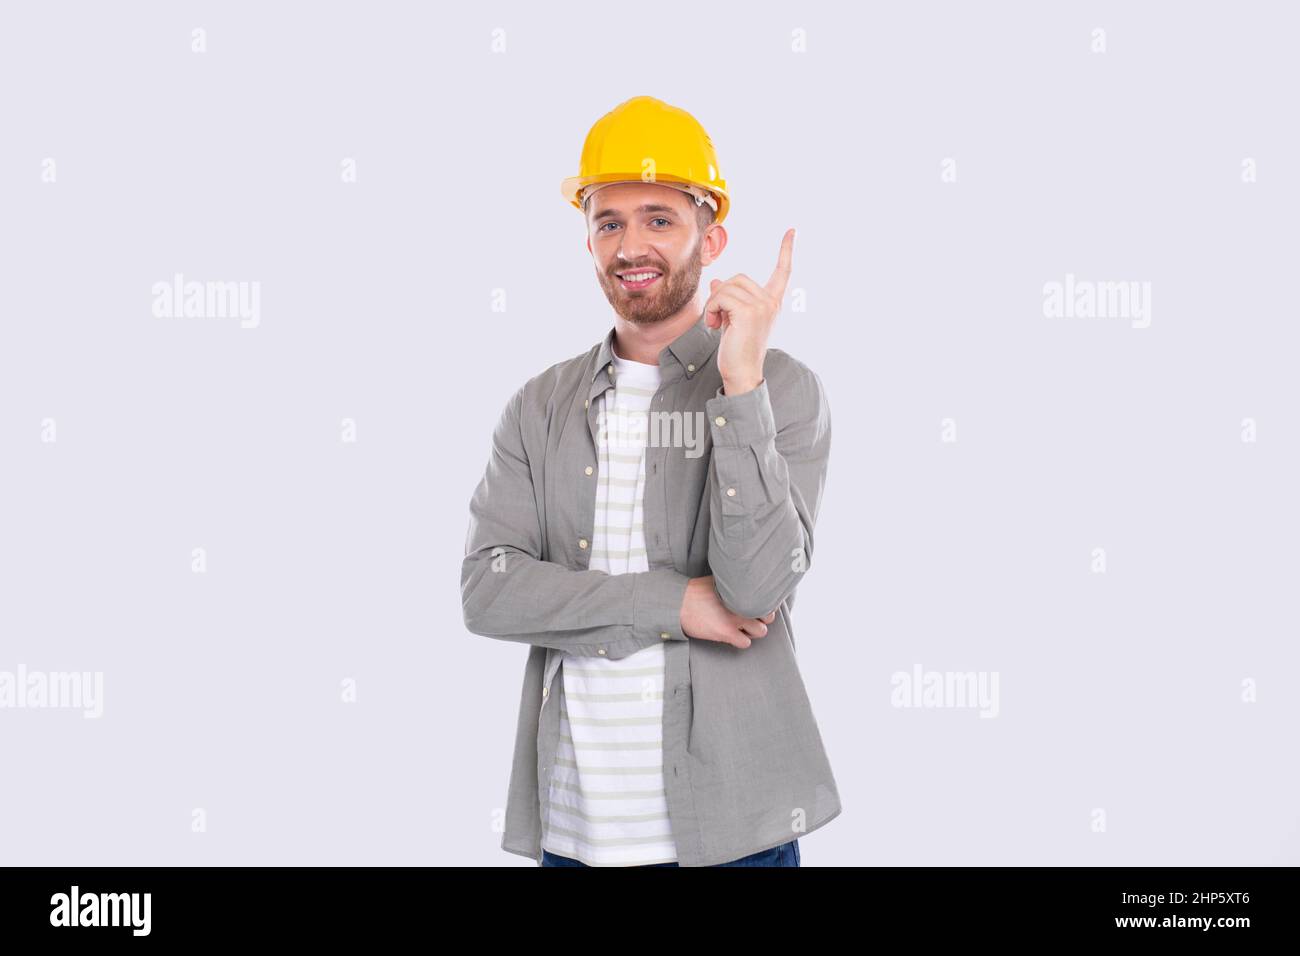 Construction Worker Having A Great Idea. Man with Idea Holding Finger Up. Worker in Hard Helmet Isolated Stock Photo